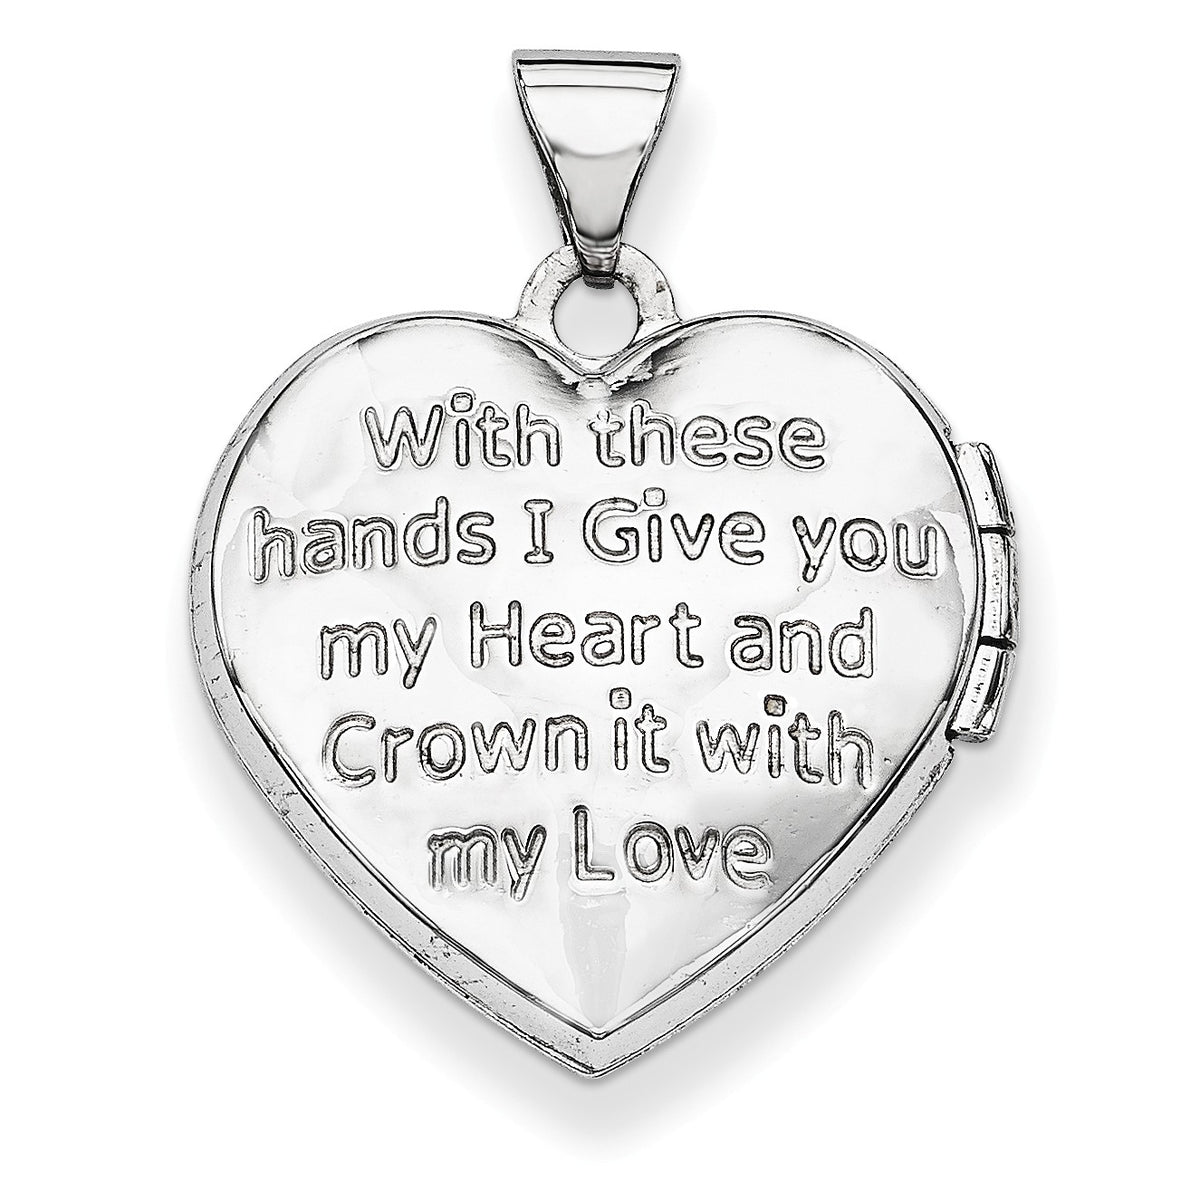 Alternate view of the 15mm Heart Shaped Diamond Claddagh Locket in 14k White Gold by The Black Bow Jewelry Co.